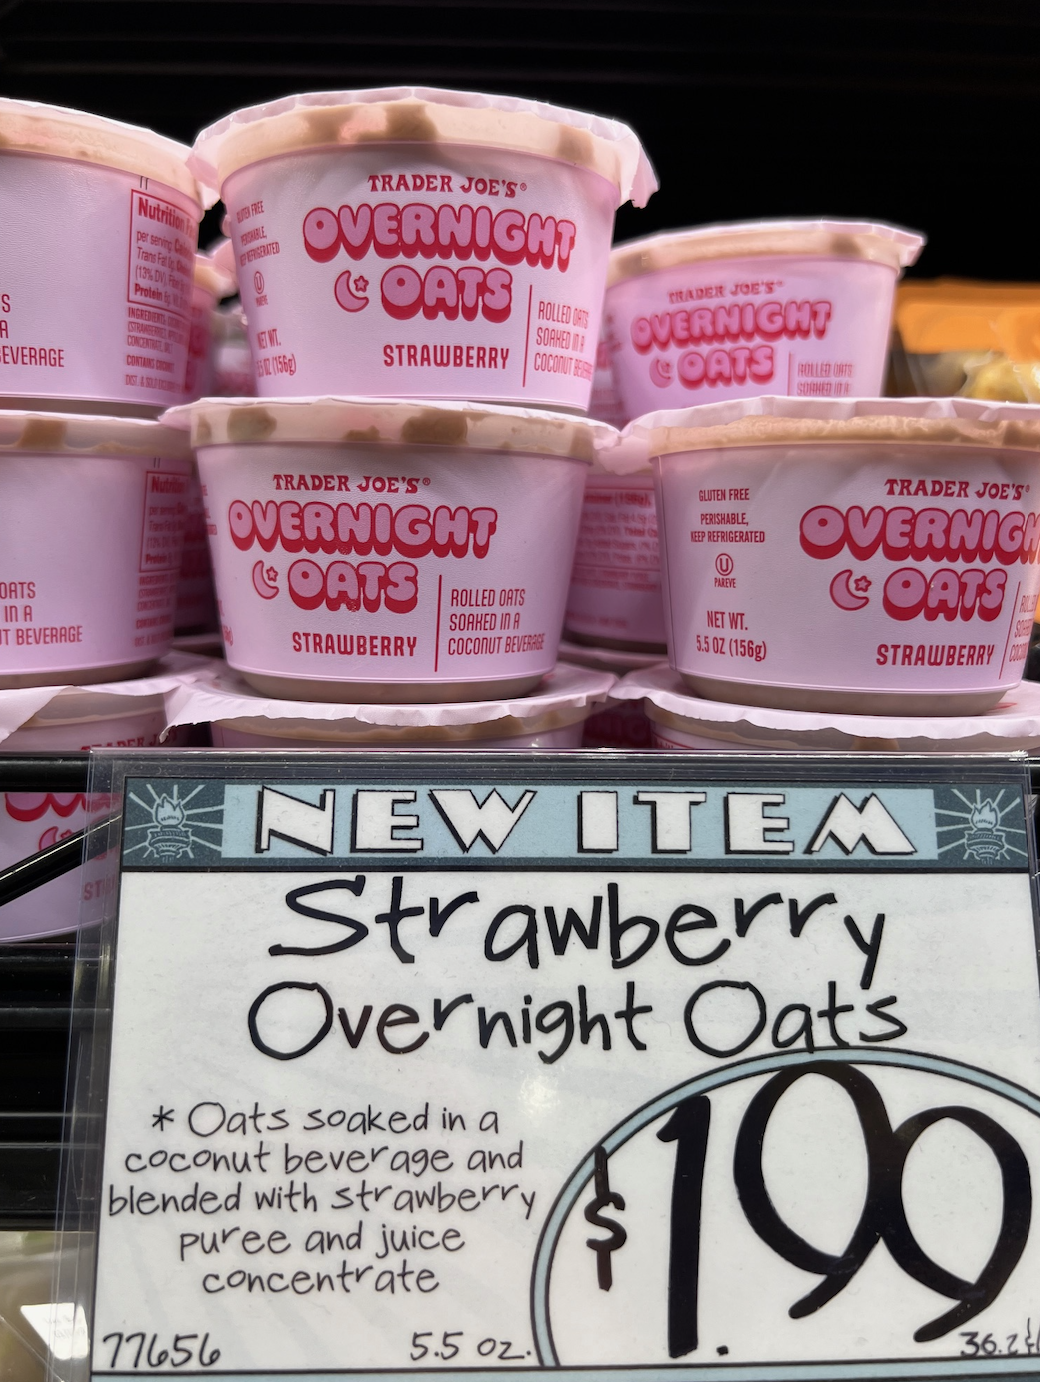 Shelves stocked with containers of Trader Joe&#x27;s new Strawberry Overnight Oats, with a price tag of $1.99 in the foreground